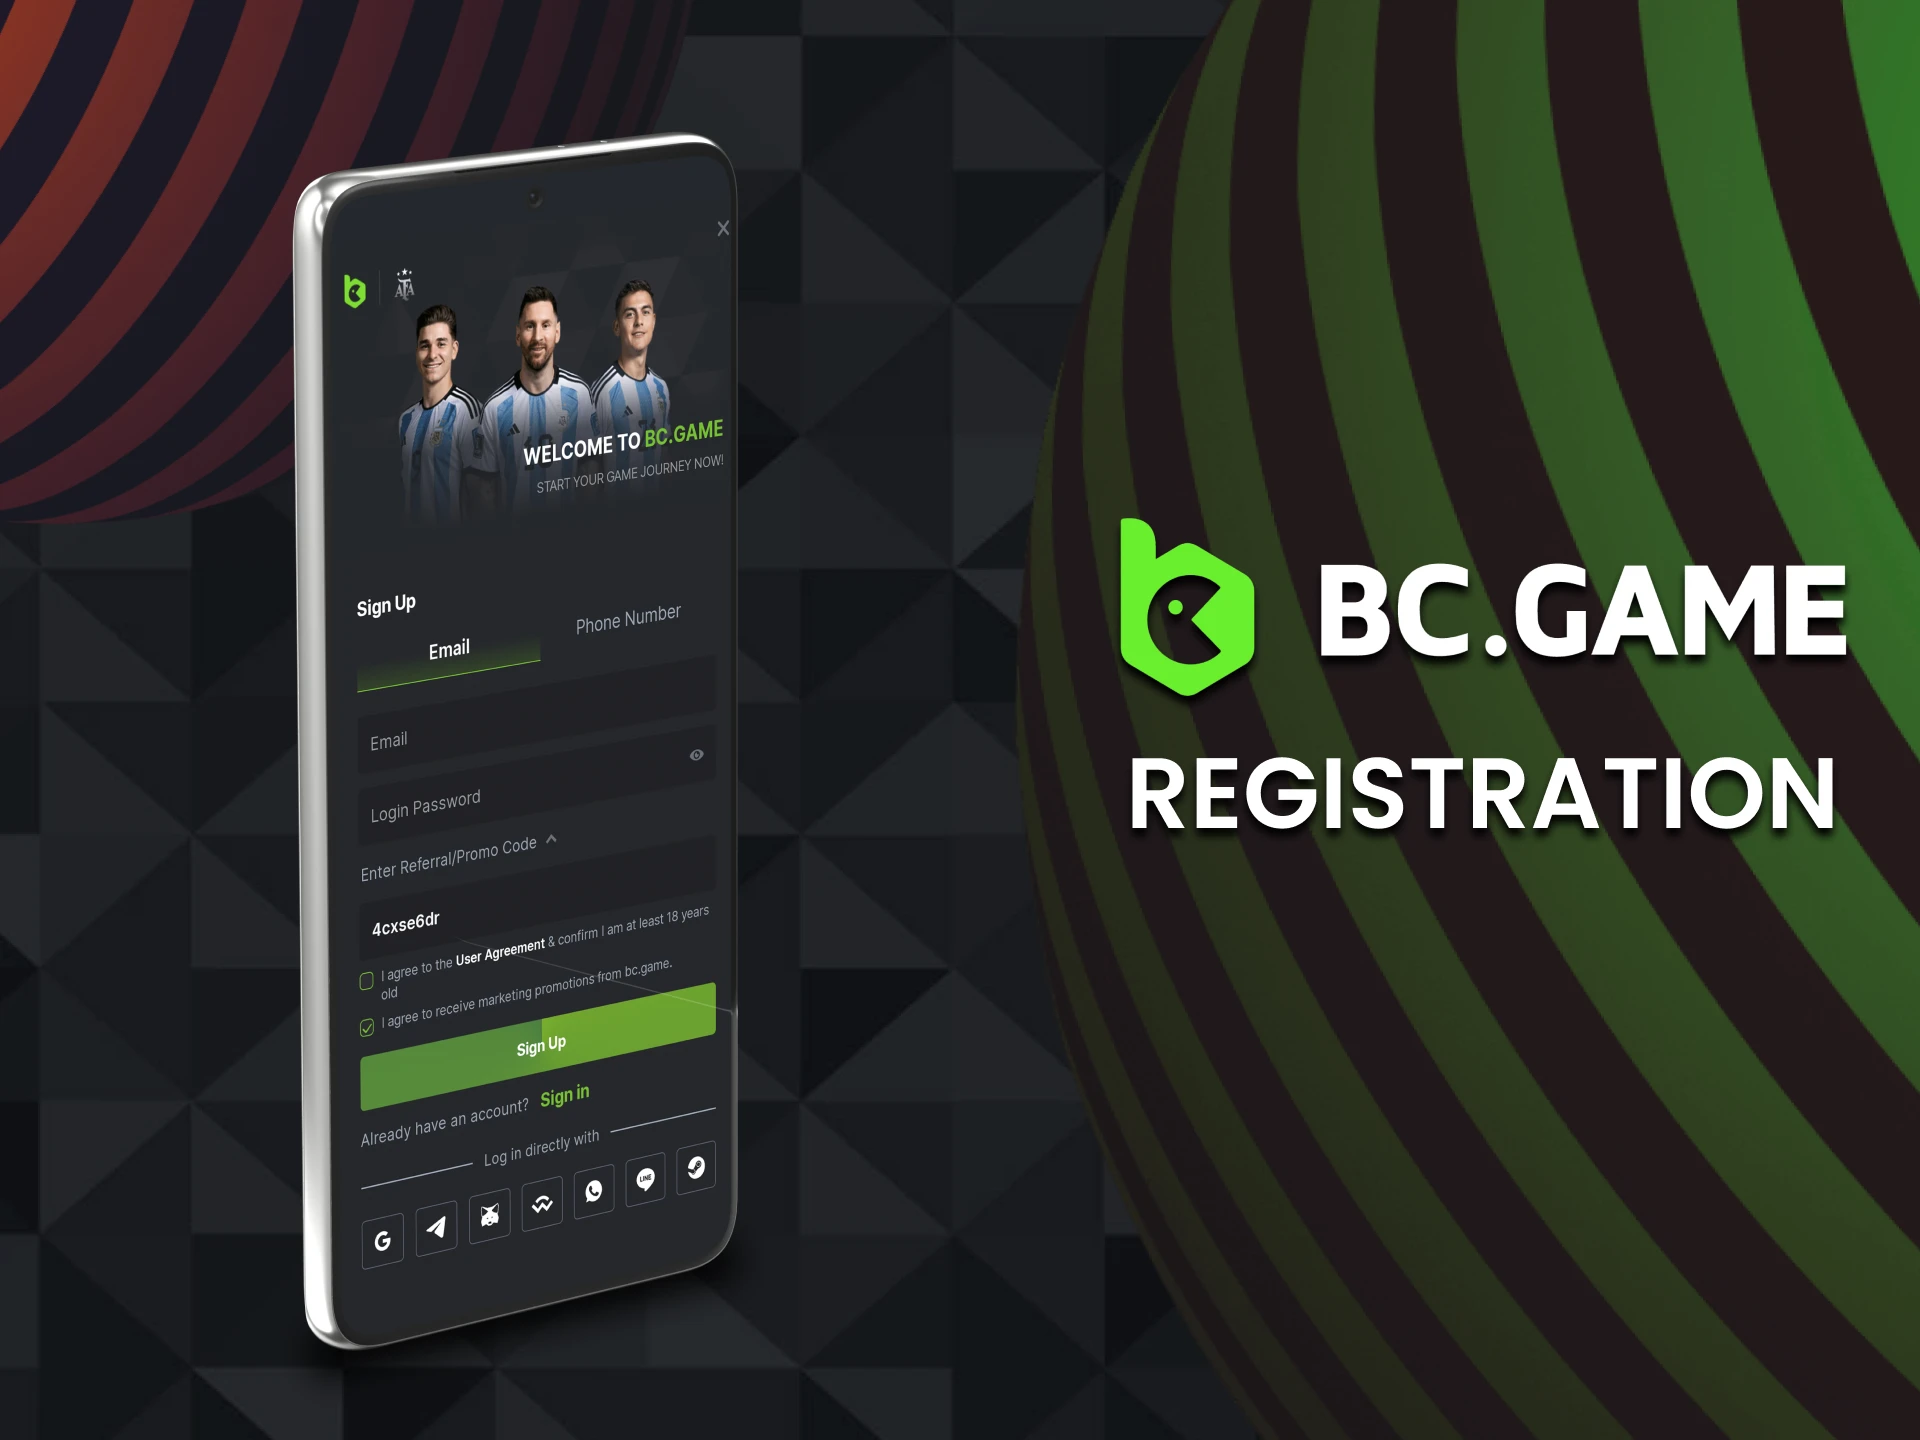 You can create an account via the BC Game app.